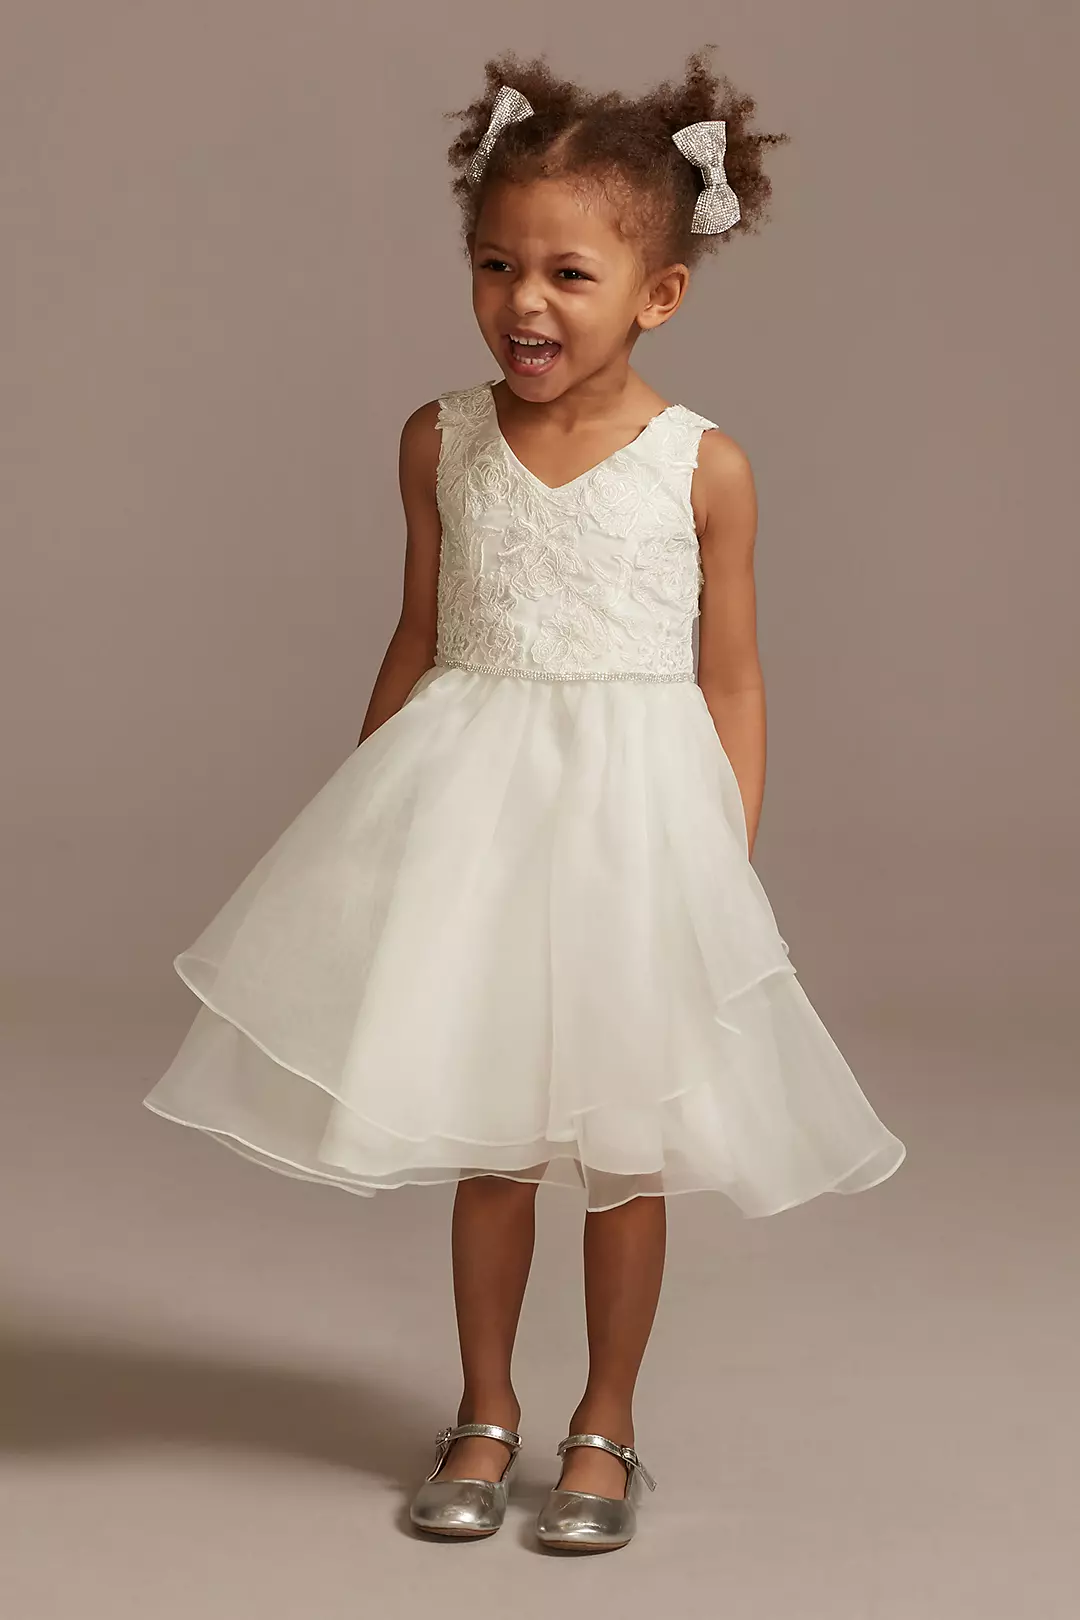 Lace Applique Flower Girl Dress with Tiered Skirt Image